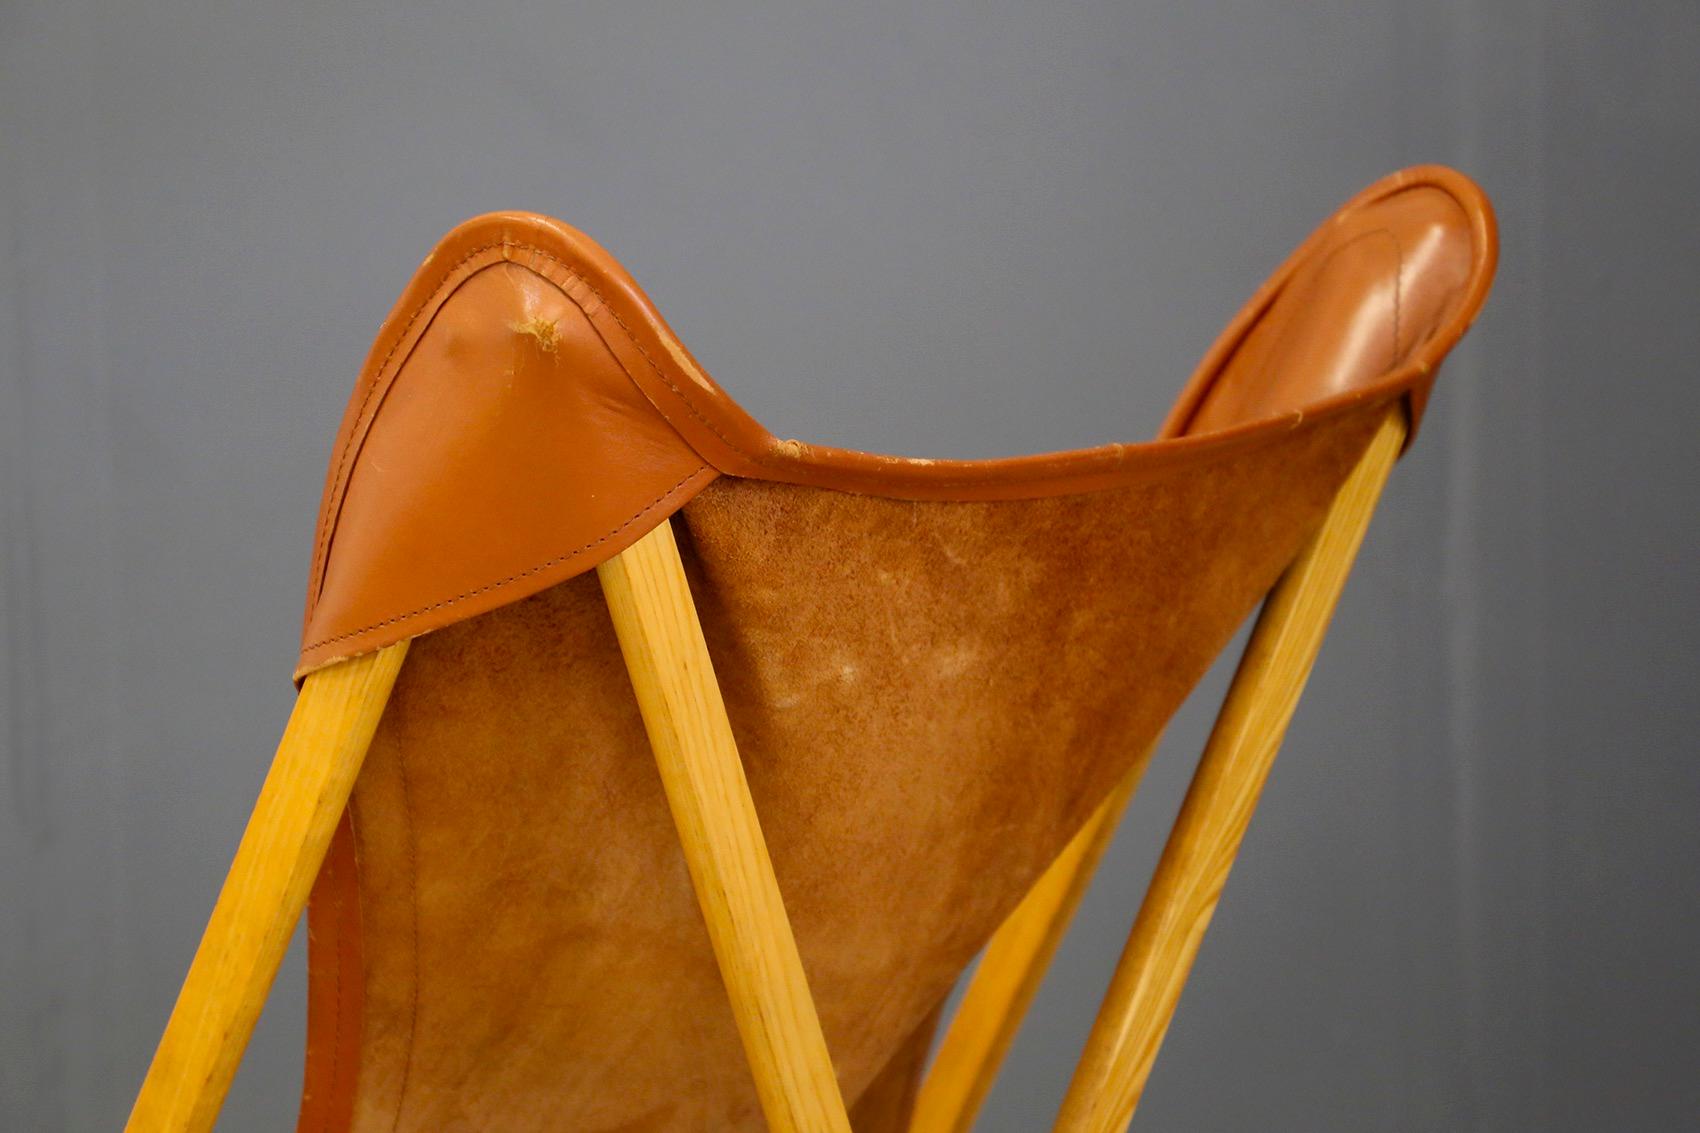 folding leather chairs